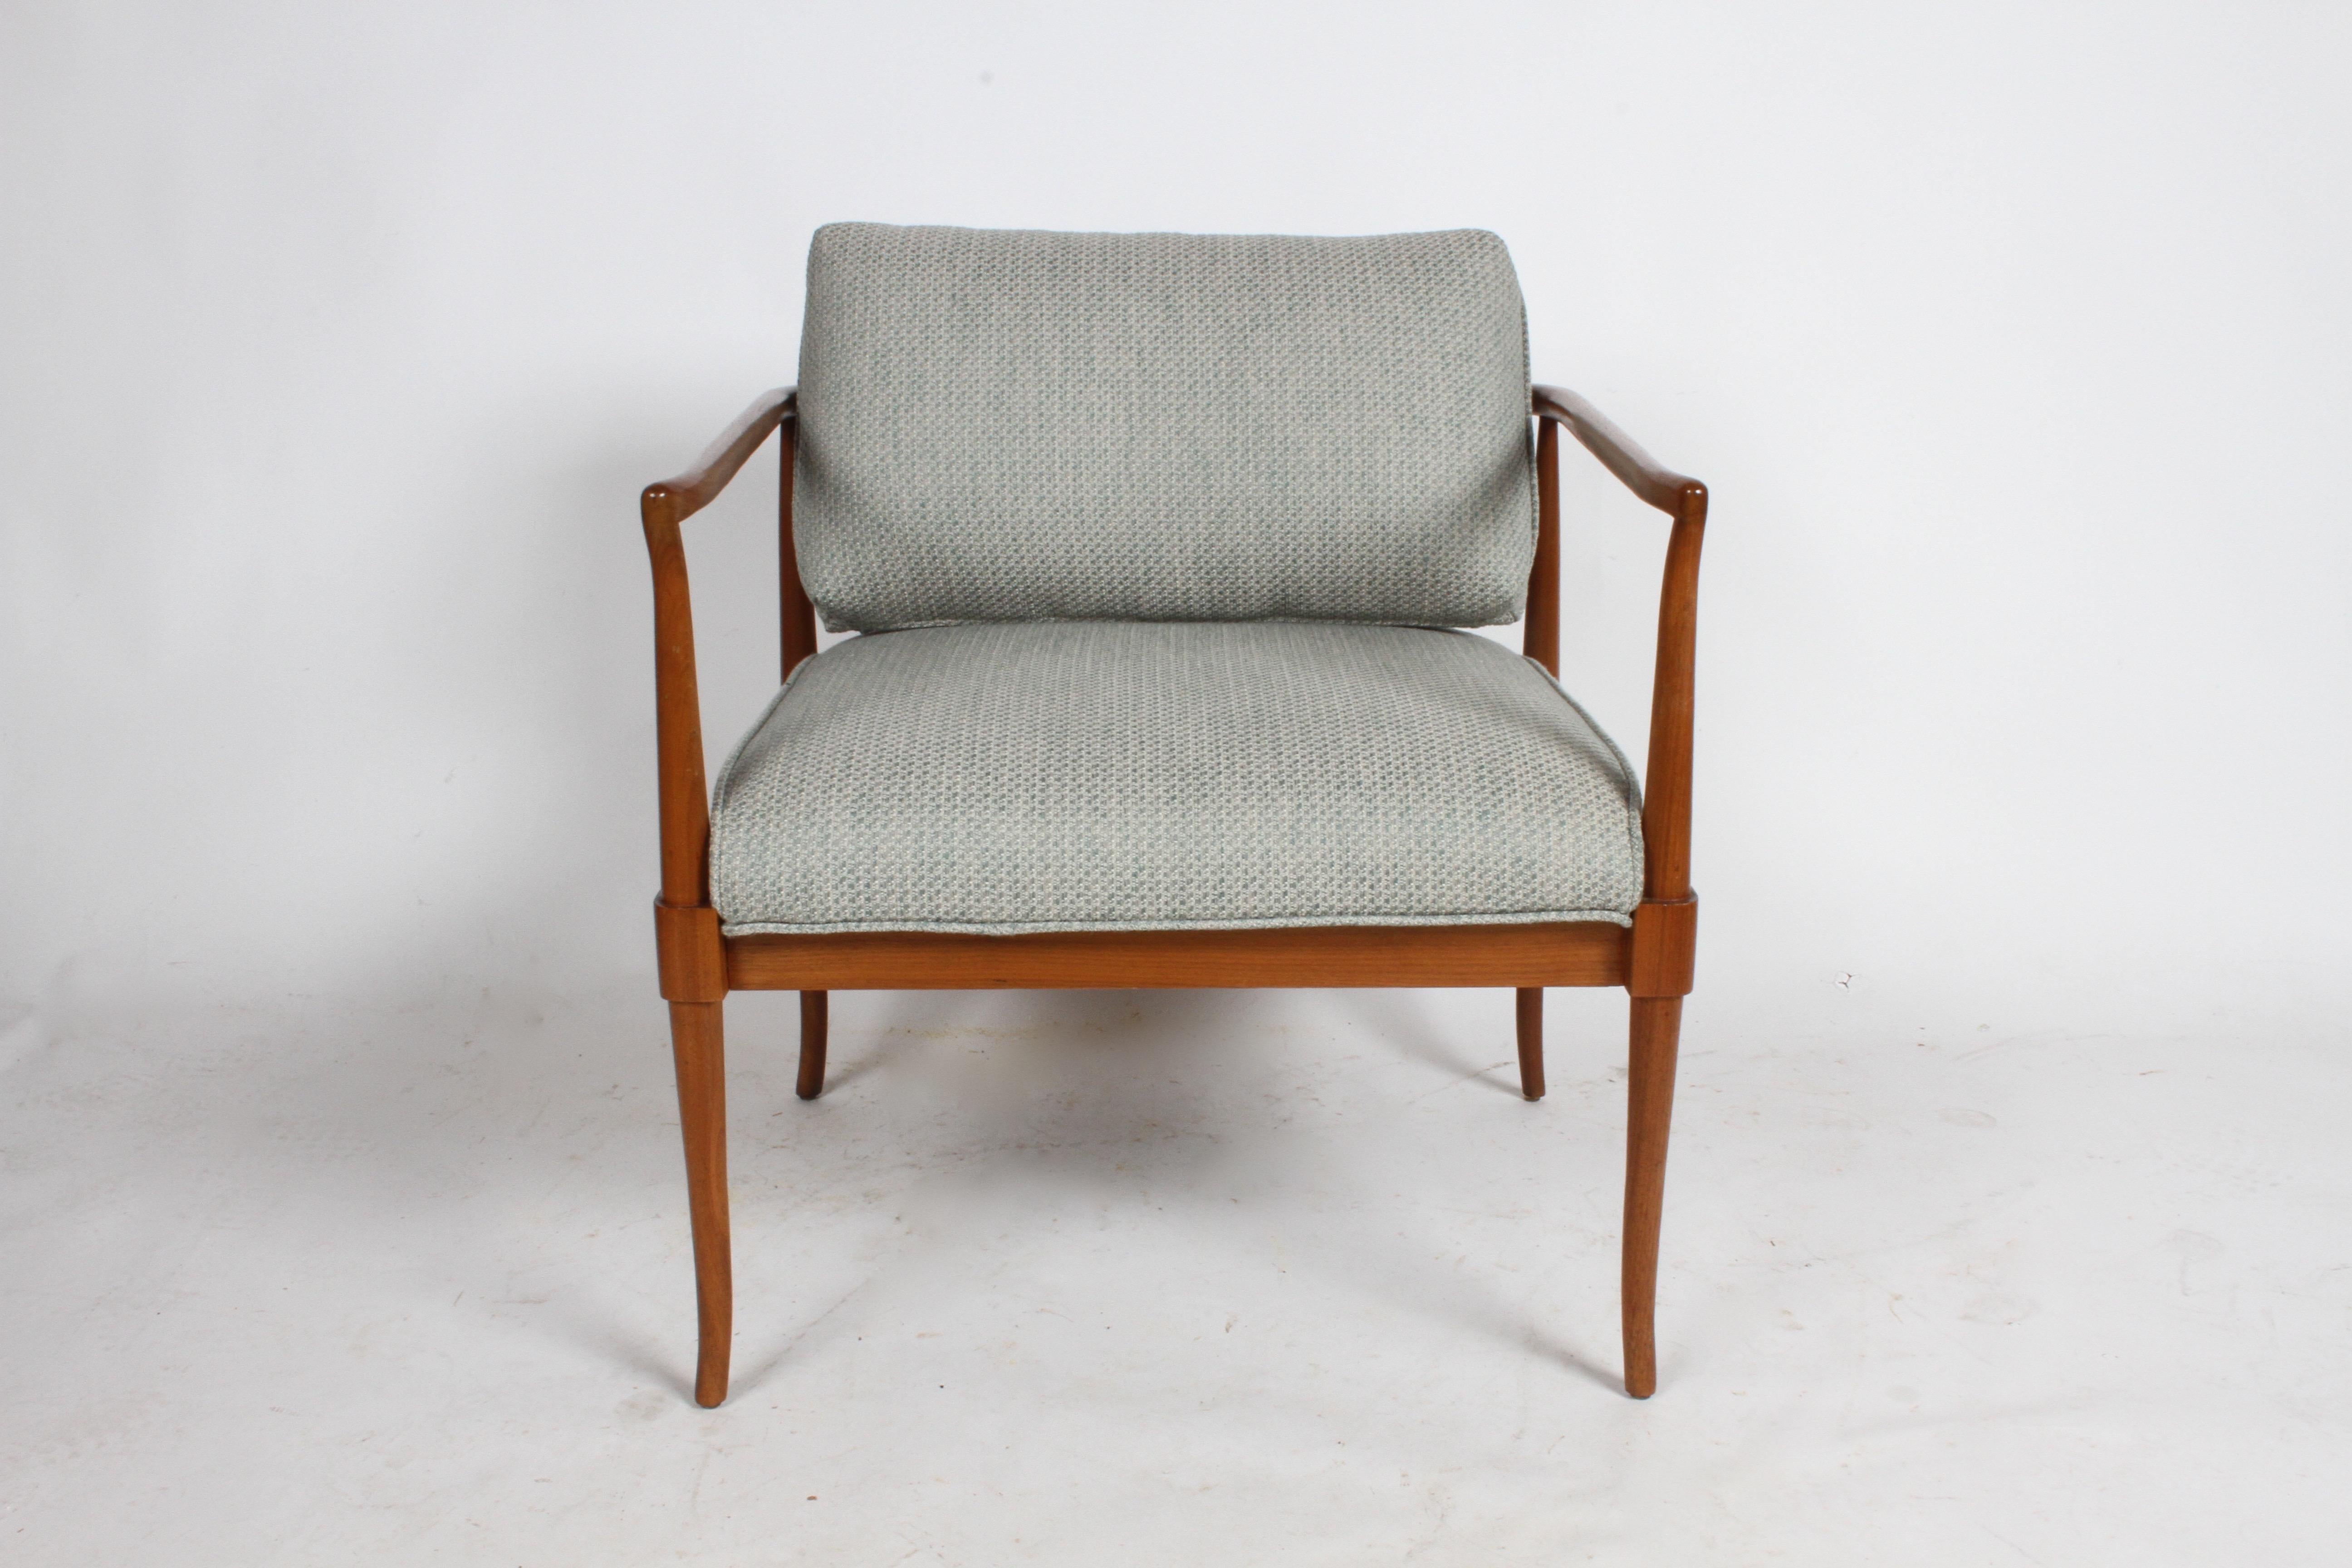 Mid-Century Modern Gerry Zanck for Gergori sculpted walnut frame lounge chair. Restored original finished, re-glued frame with new foam and upholstery. This lounge chair has styling of another mid-century designer T.H. Robsjohn-Gibbings for